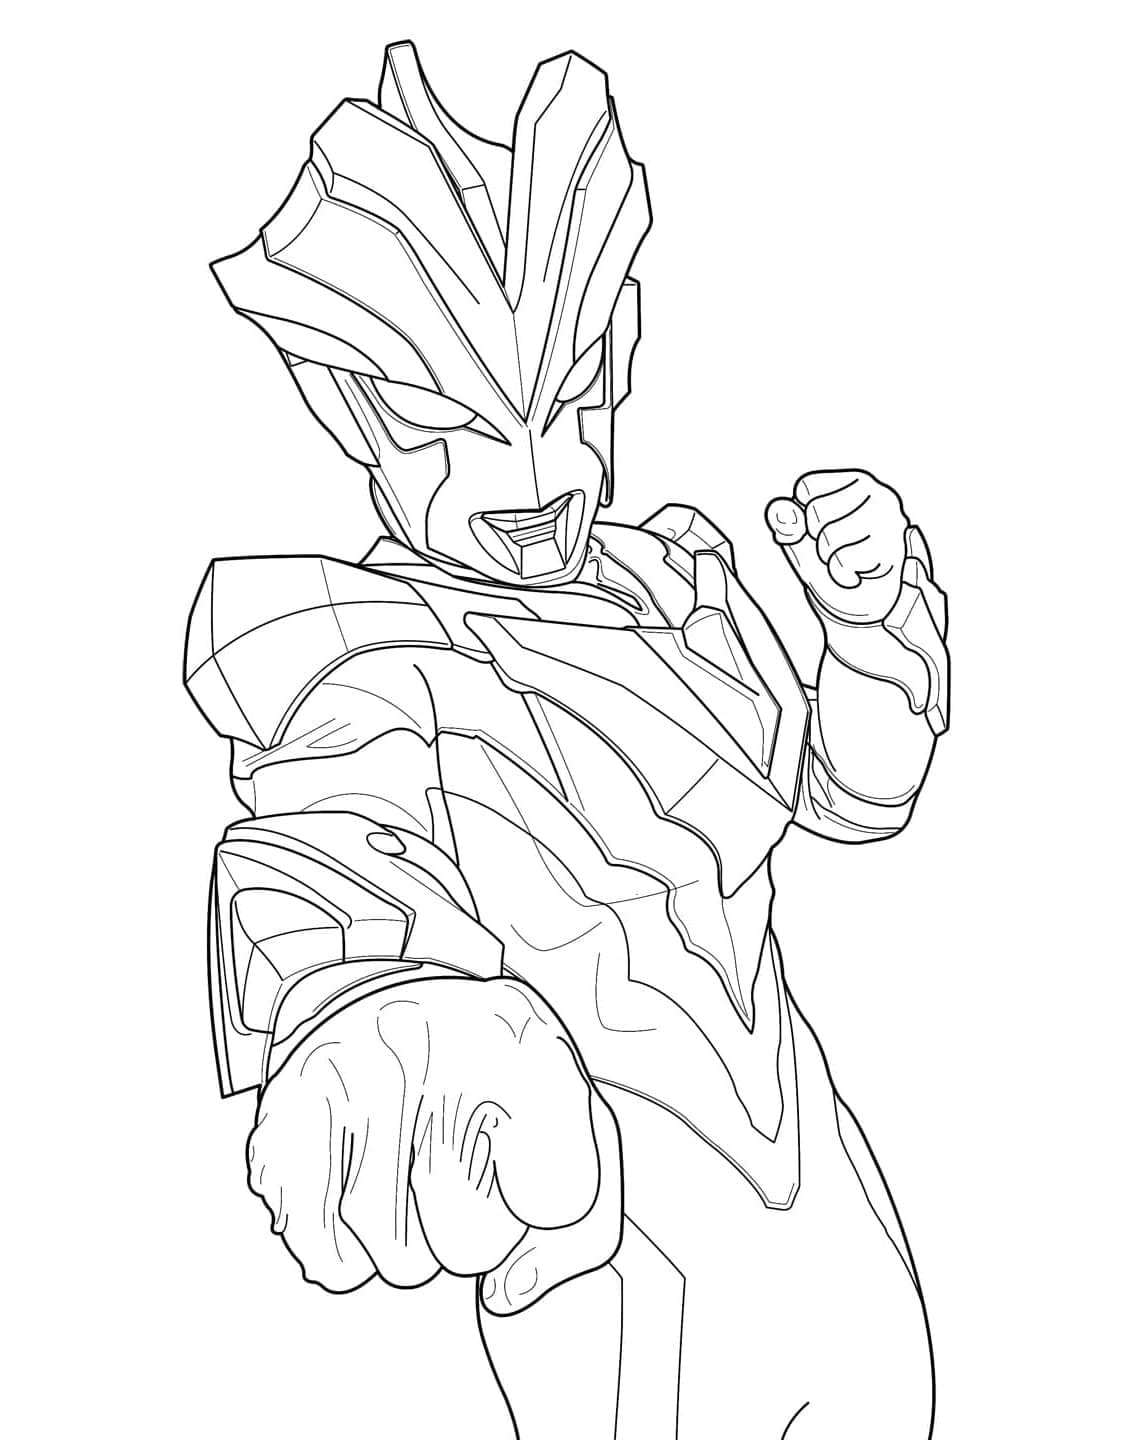 Ultraman 12 coloring page